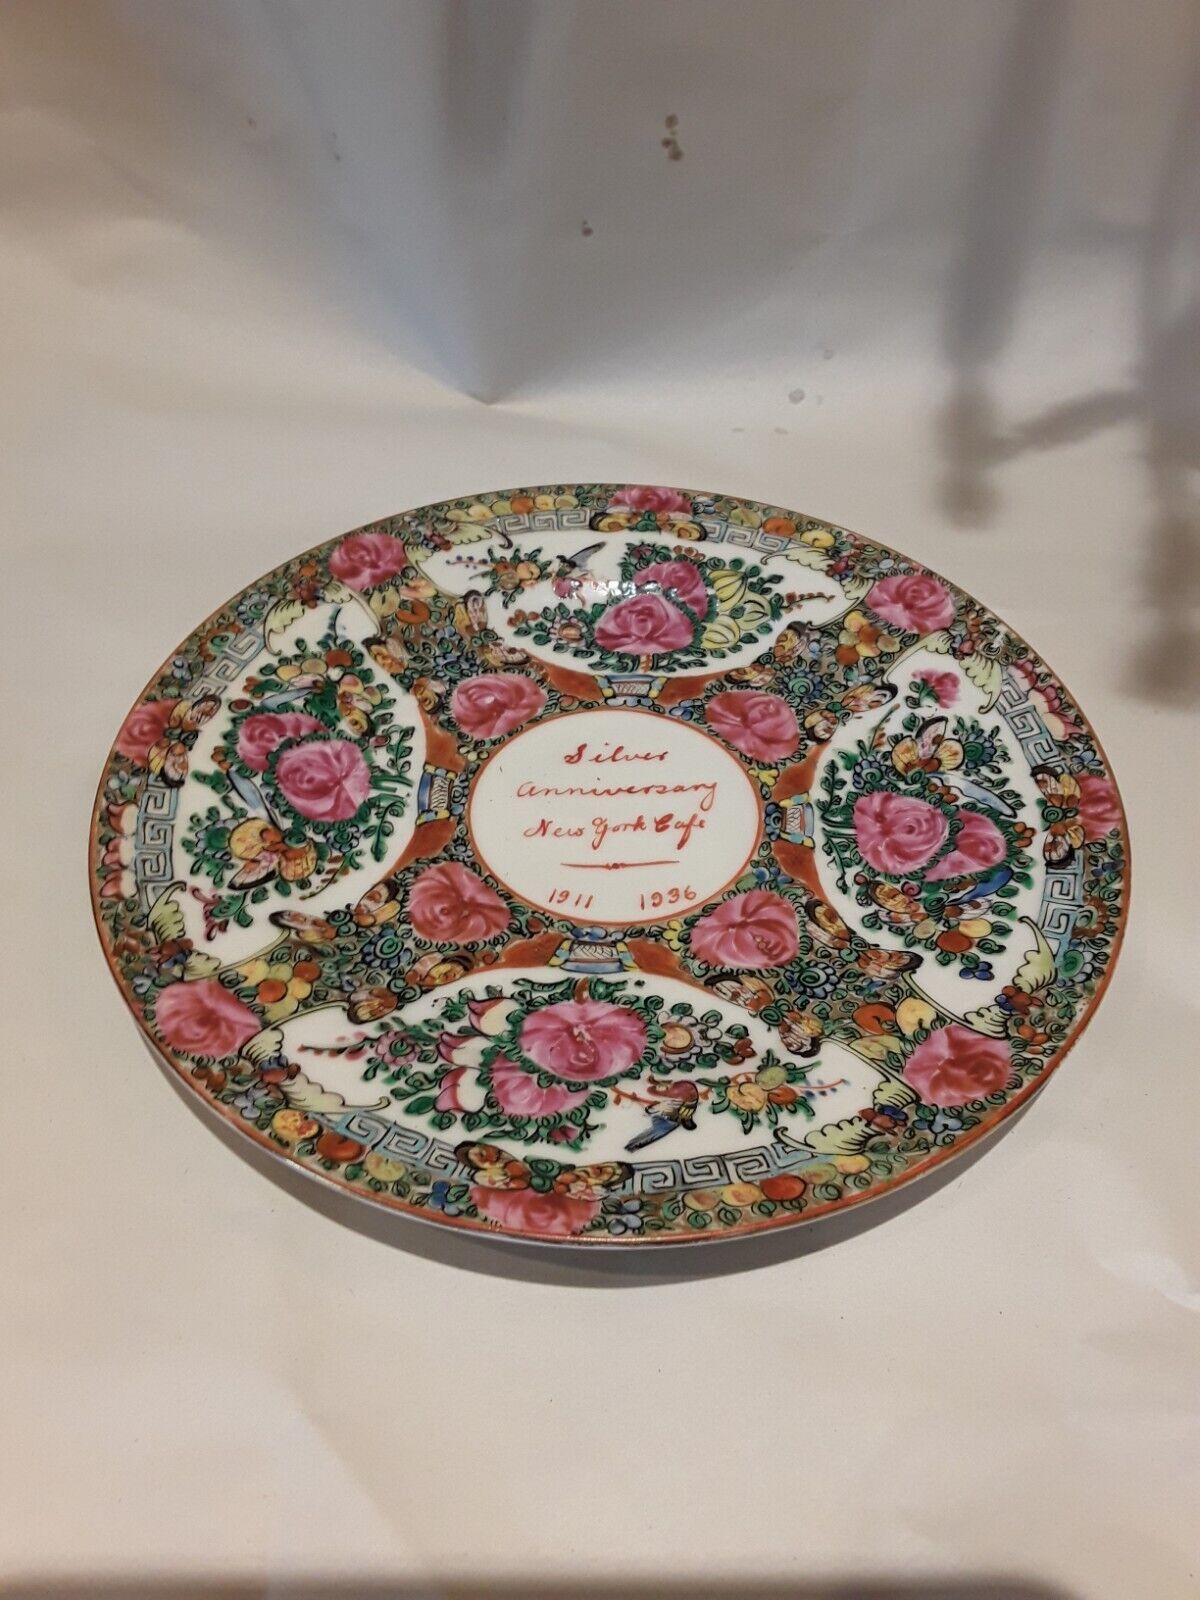 Rare 1936 Chinese porcelain rose plate. For Silver Anniversary of New York Cafe.